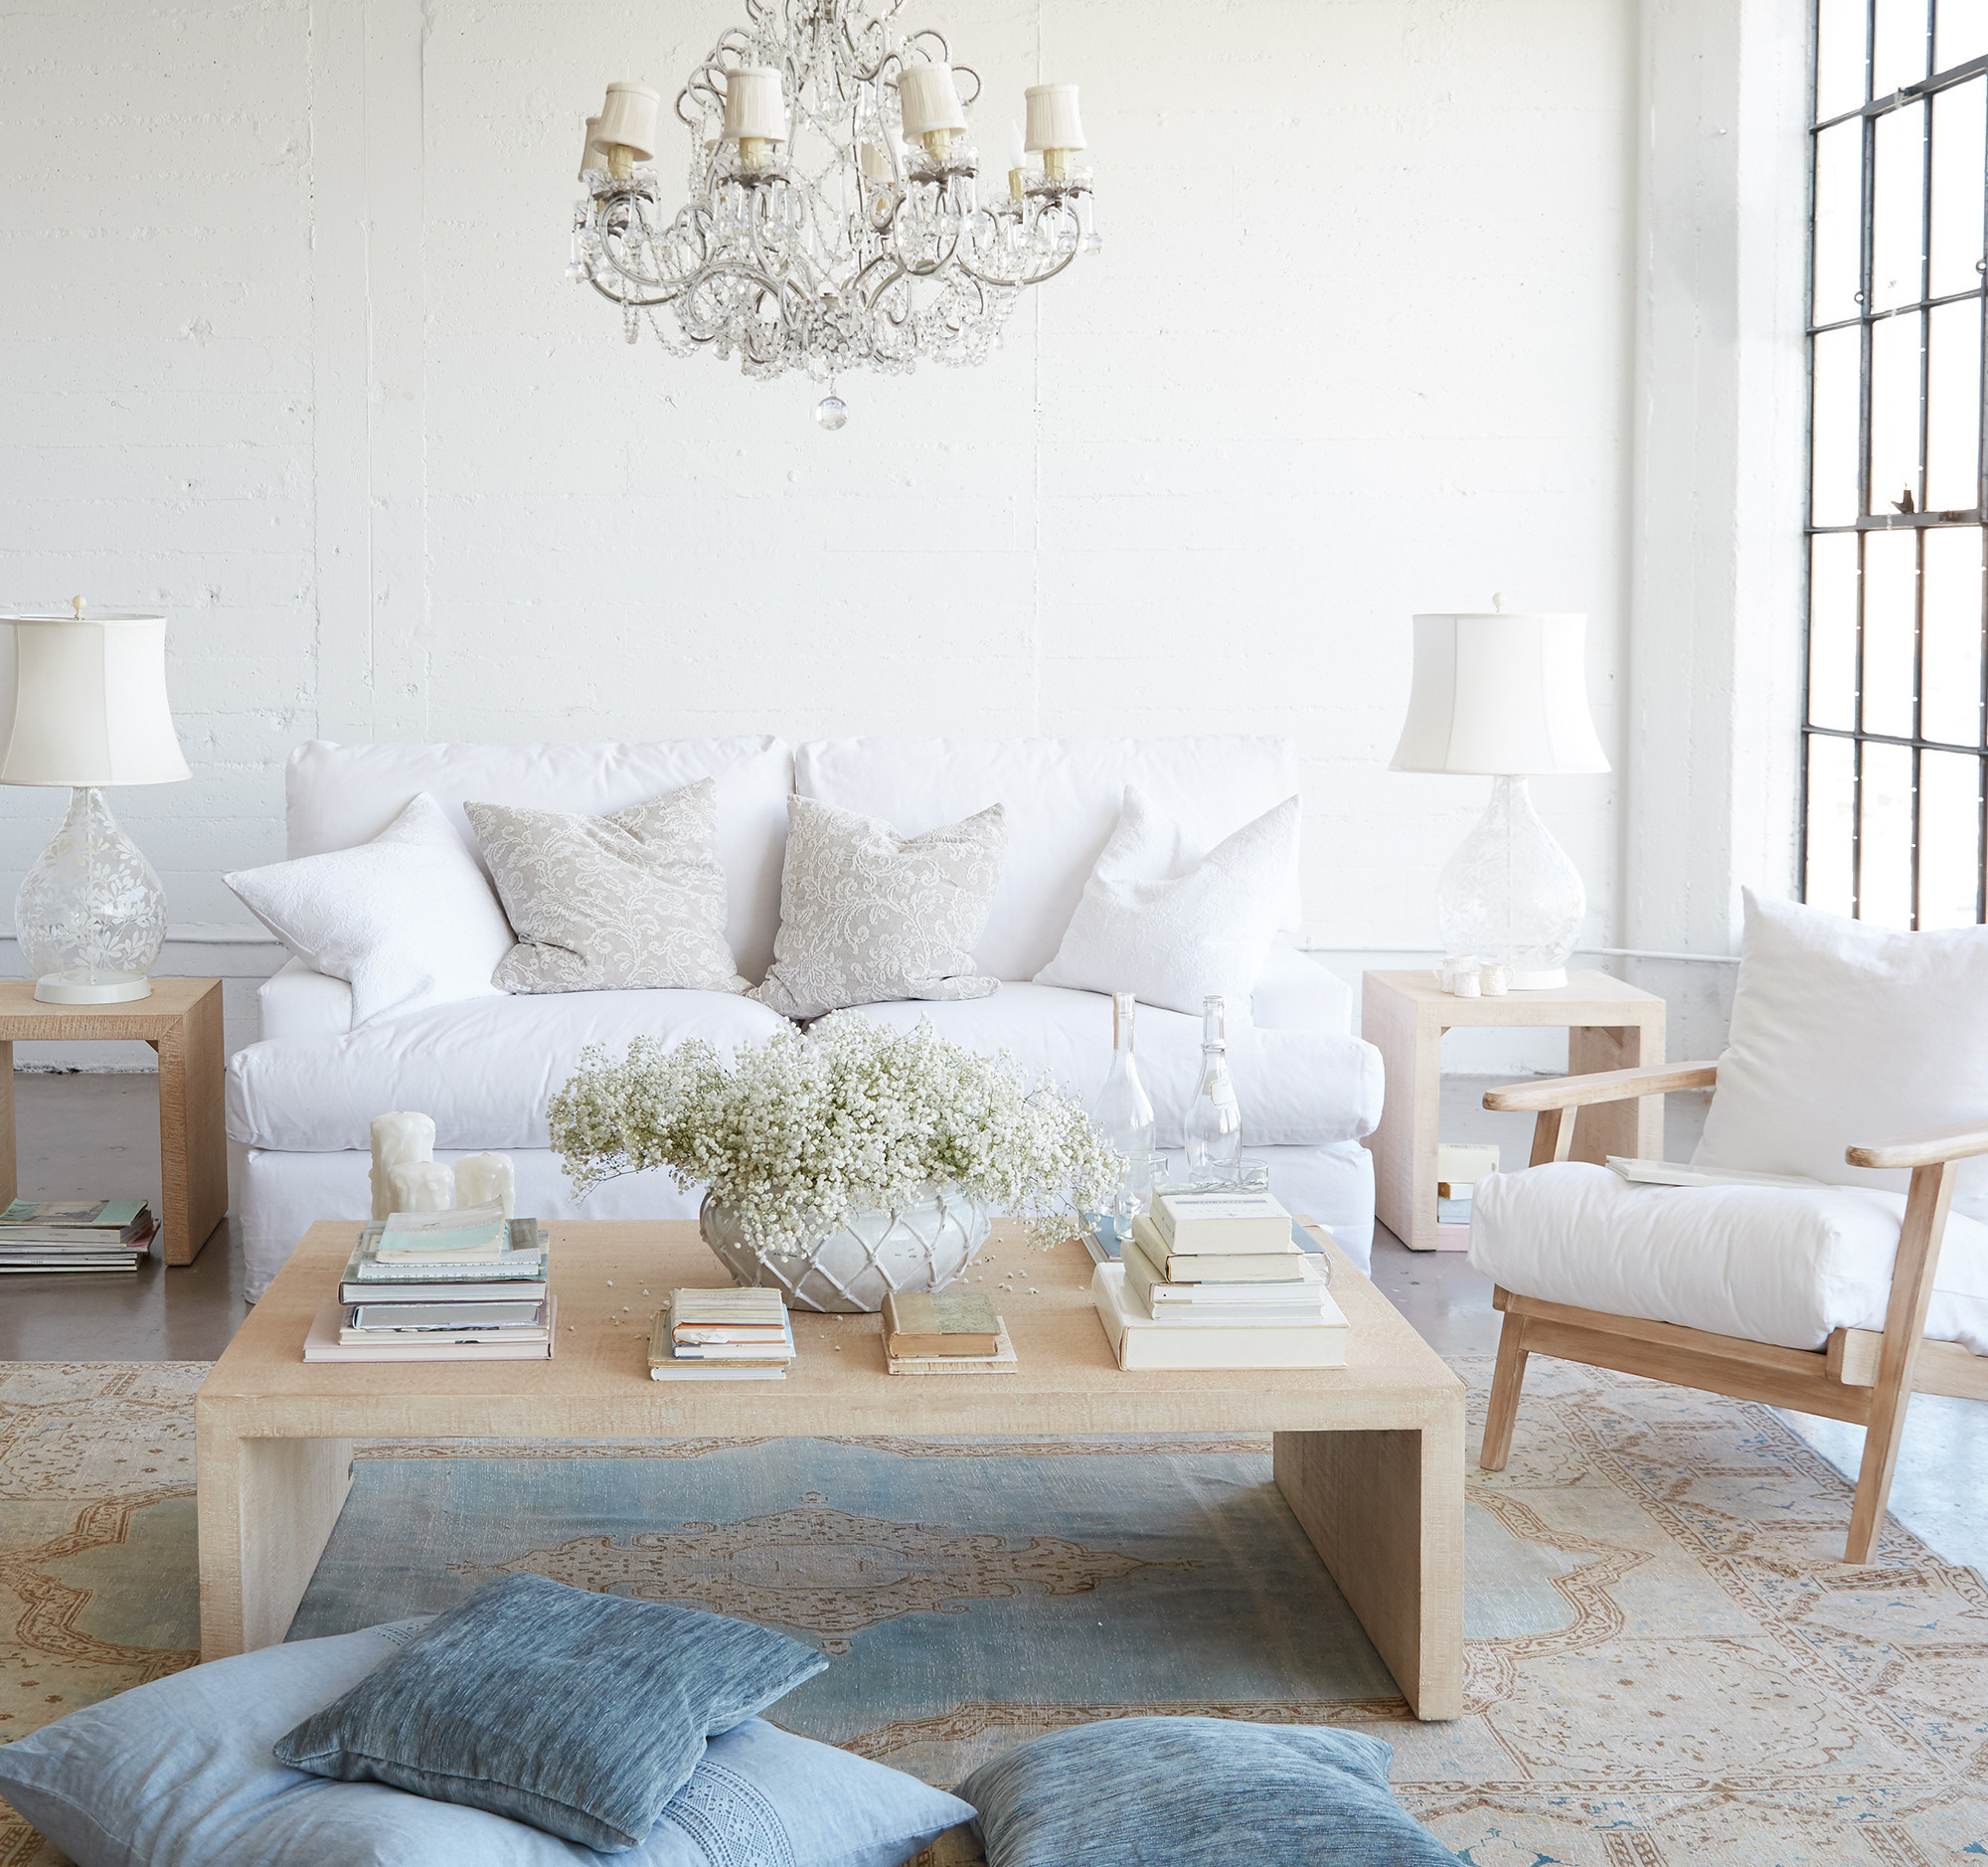 Shabby Chic Decor finds await you in this inspiring lineup of interior design inspiration. #shabbychic #interiordesignideas #decoratingideas #rachelashwell #livingroom